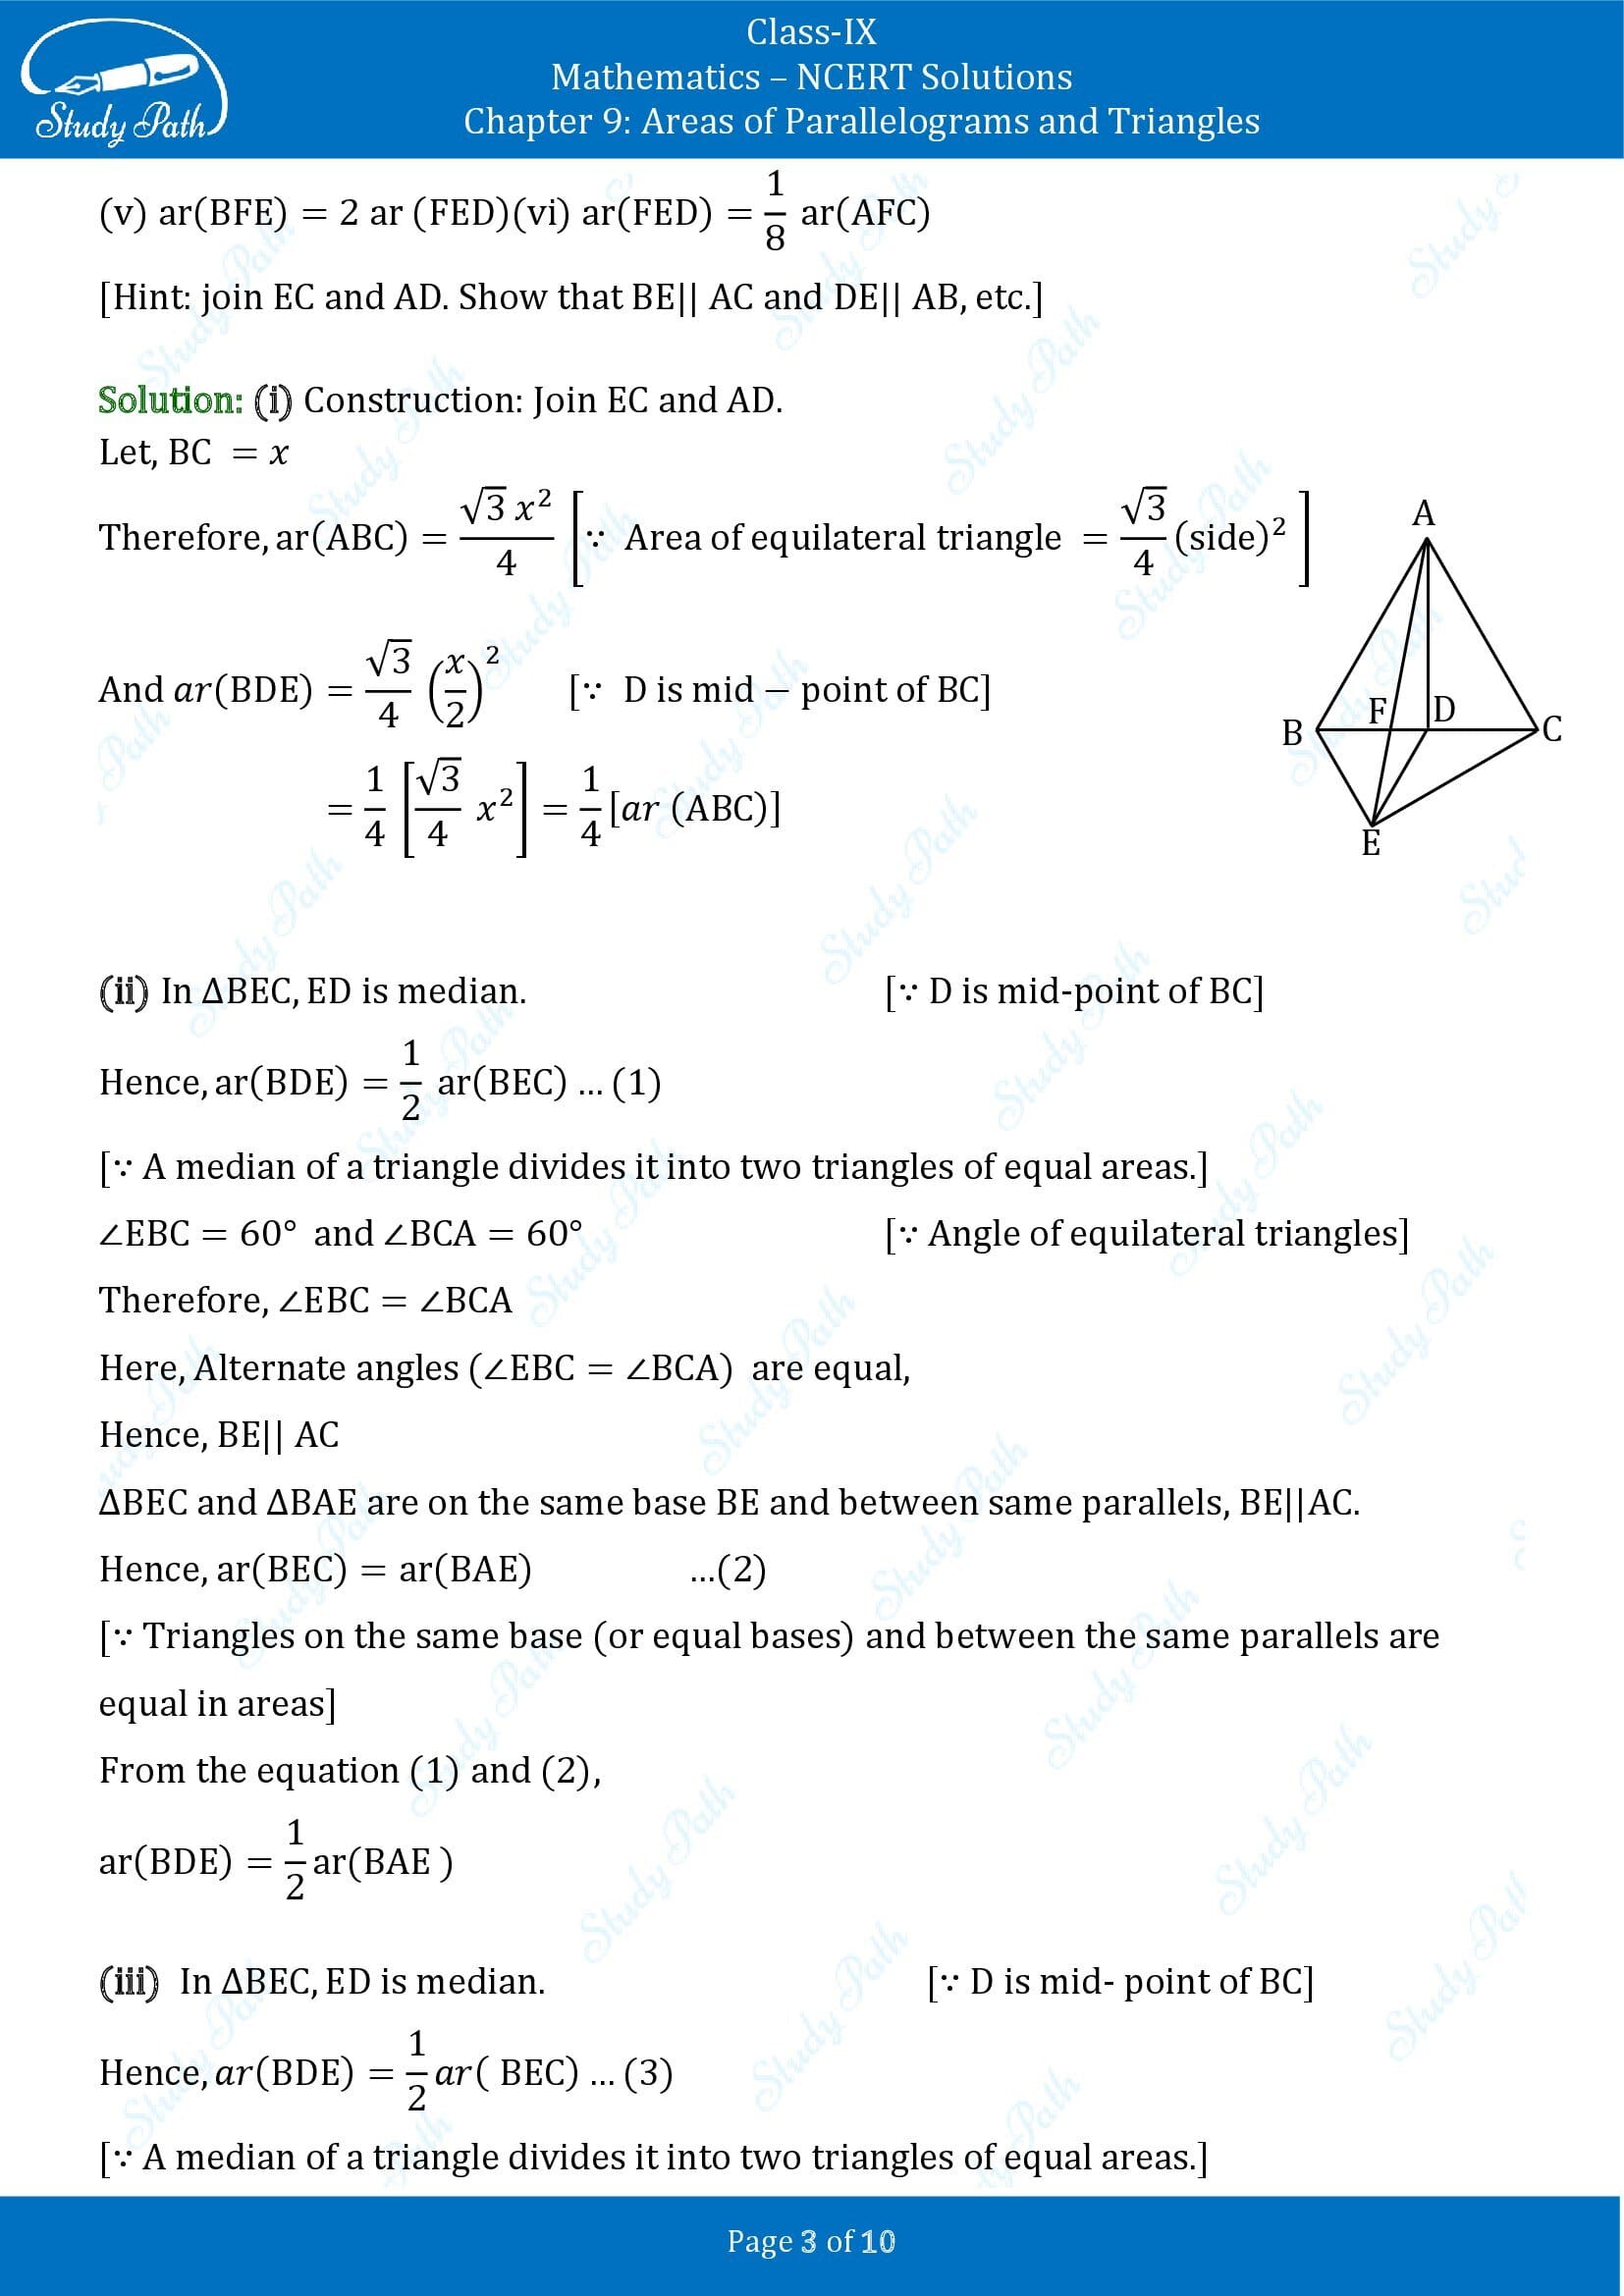 NCERT Solutions for Class 9 Maths Chapter 9 Areas of Parallelograms and Triangles Exercise 9.4 00003